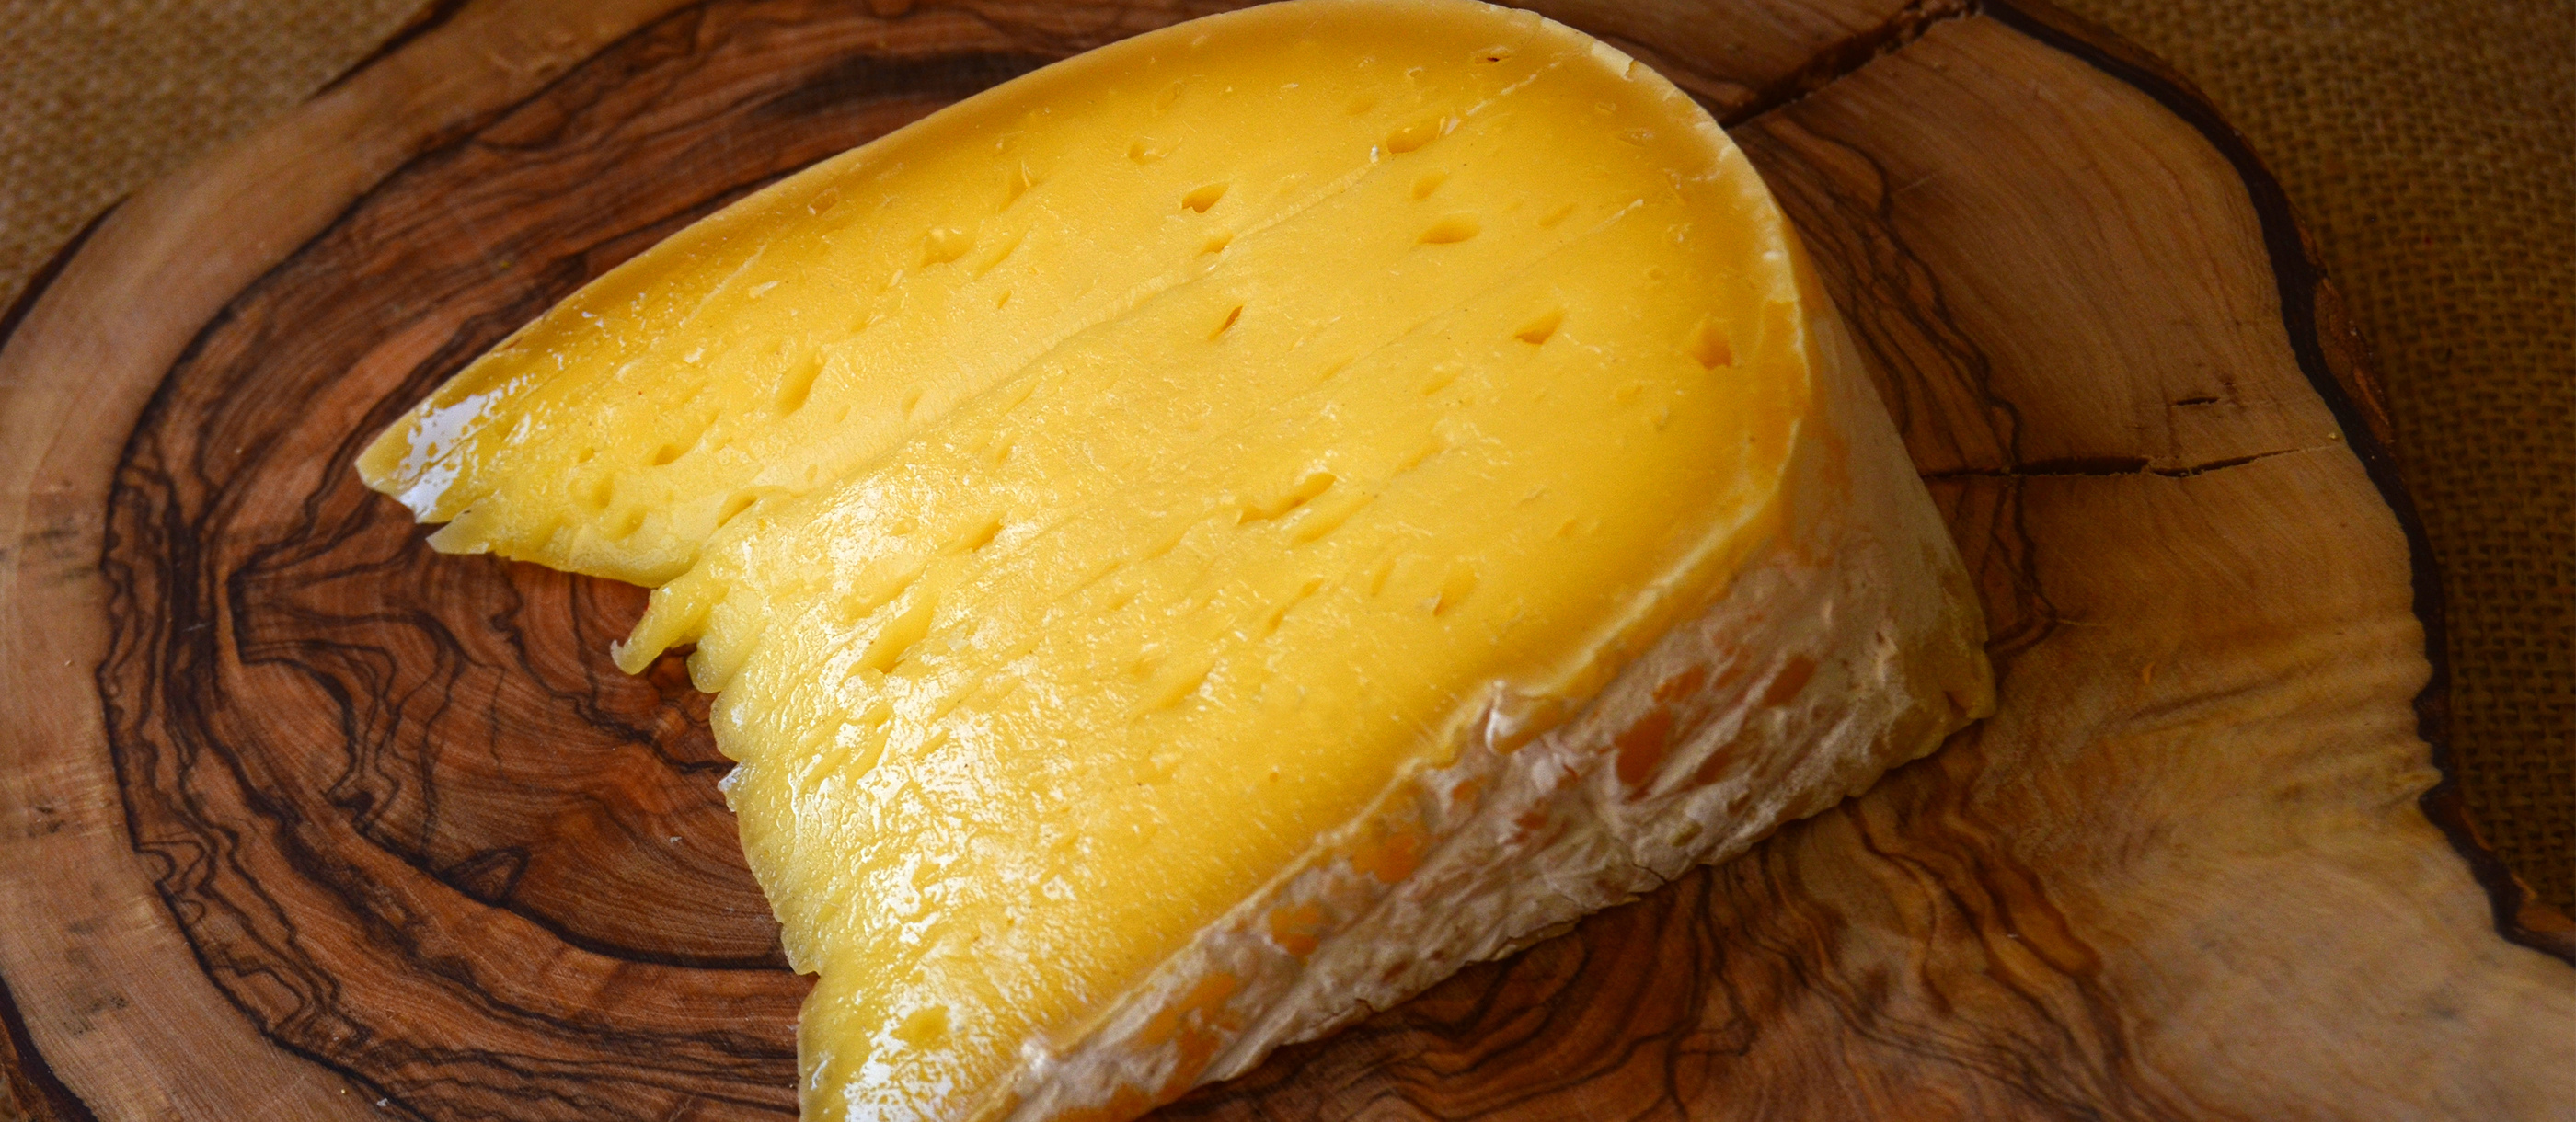 Cheese: The flavor ranges from mild and creamy to sharp and tangy. 2800x1220 Dual Screen Background.